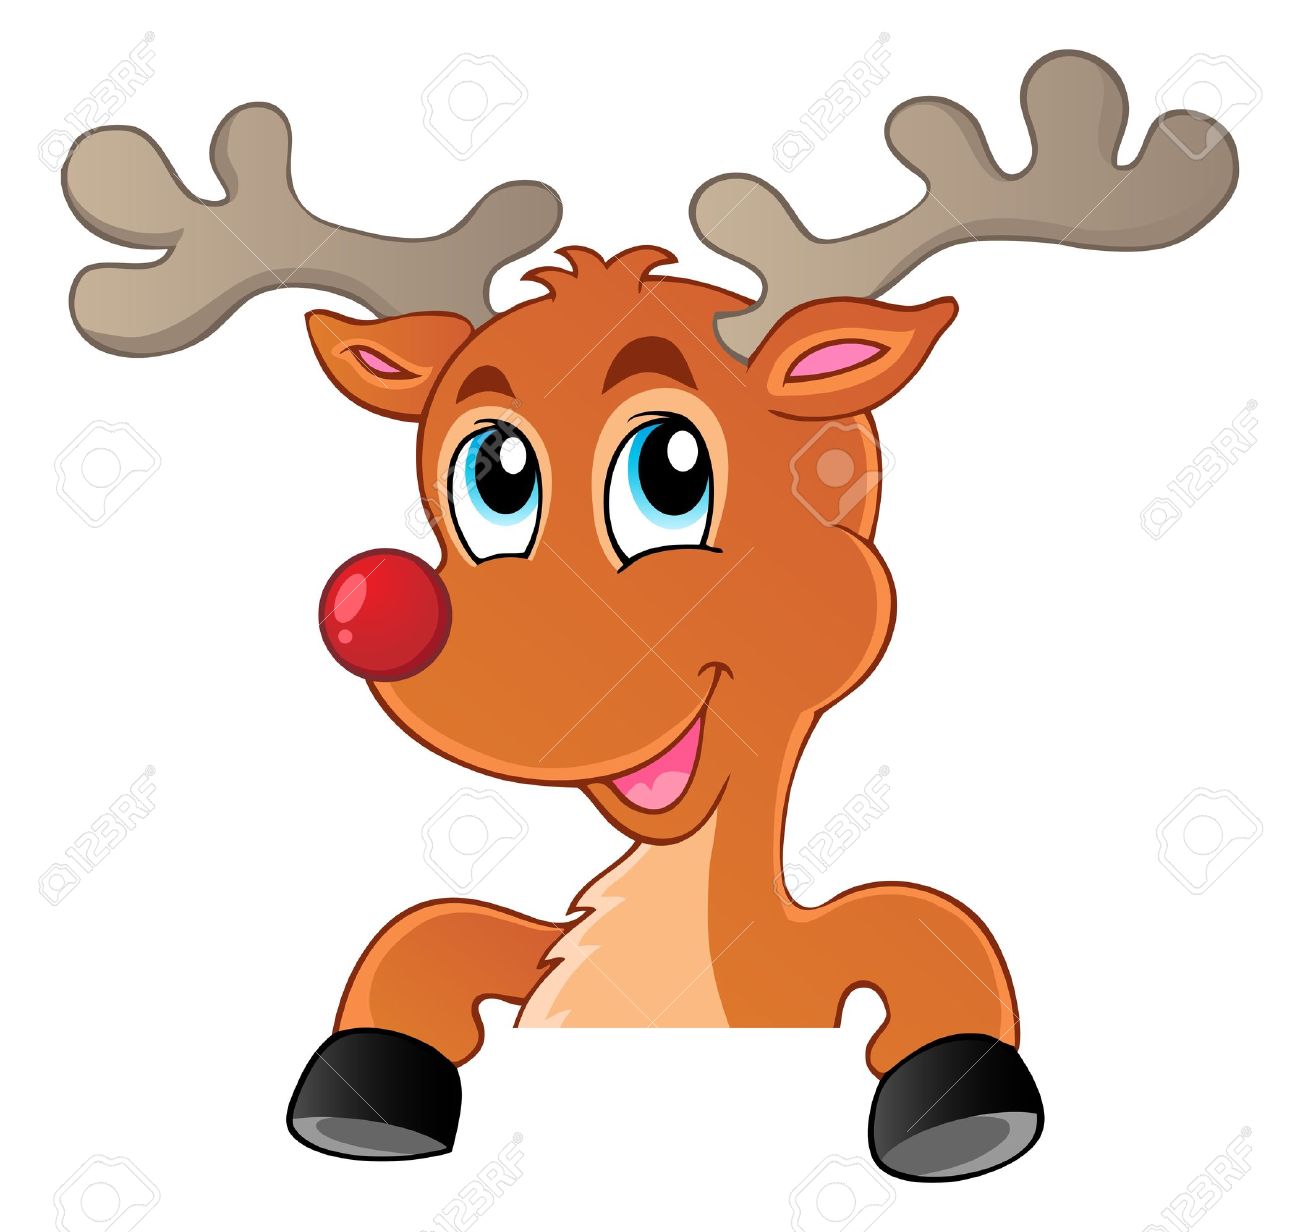 Christmas reindeer clipart free - ClipartFest